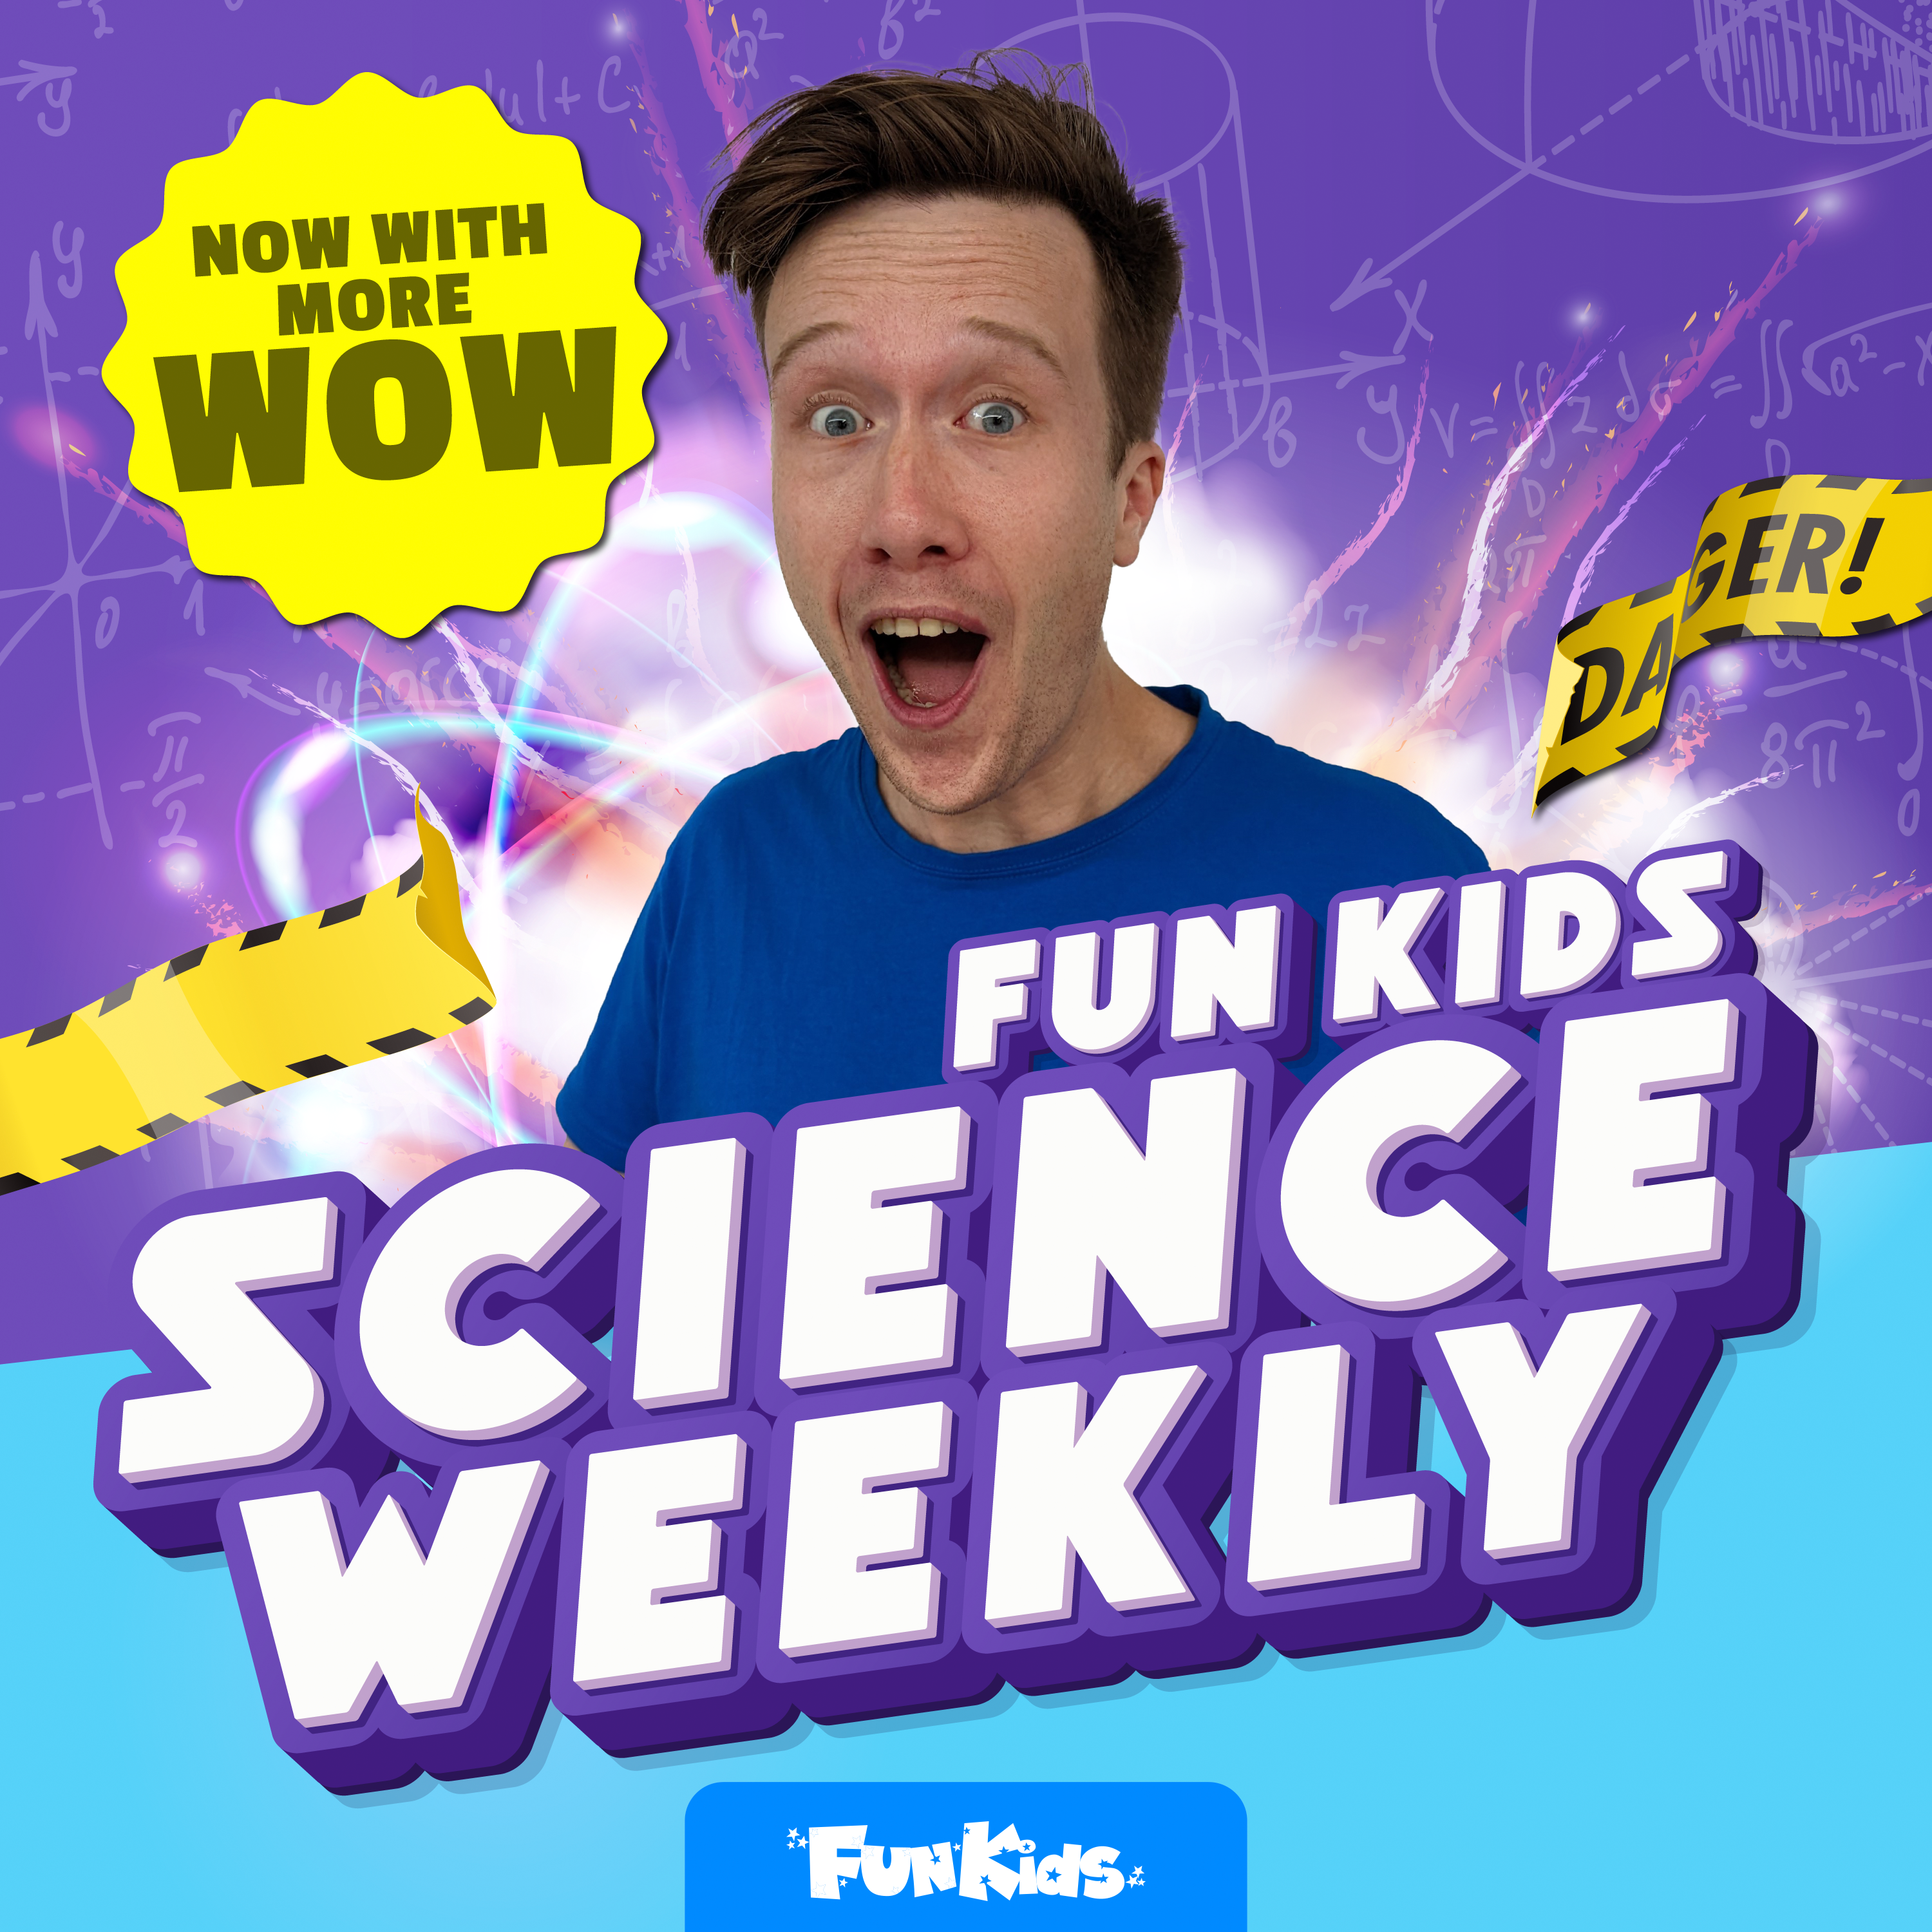 THE BIGGER AND BETTER SCIENCE WEEKLY🧑‍🔬